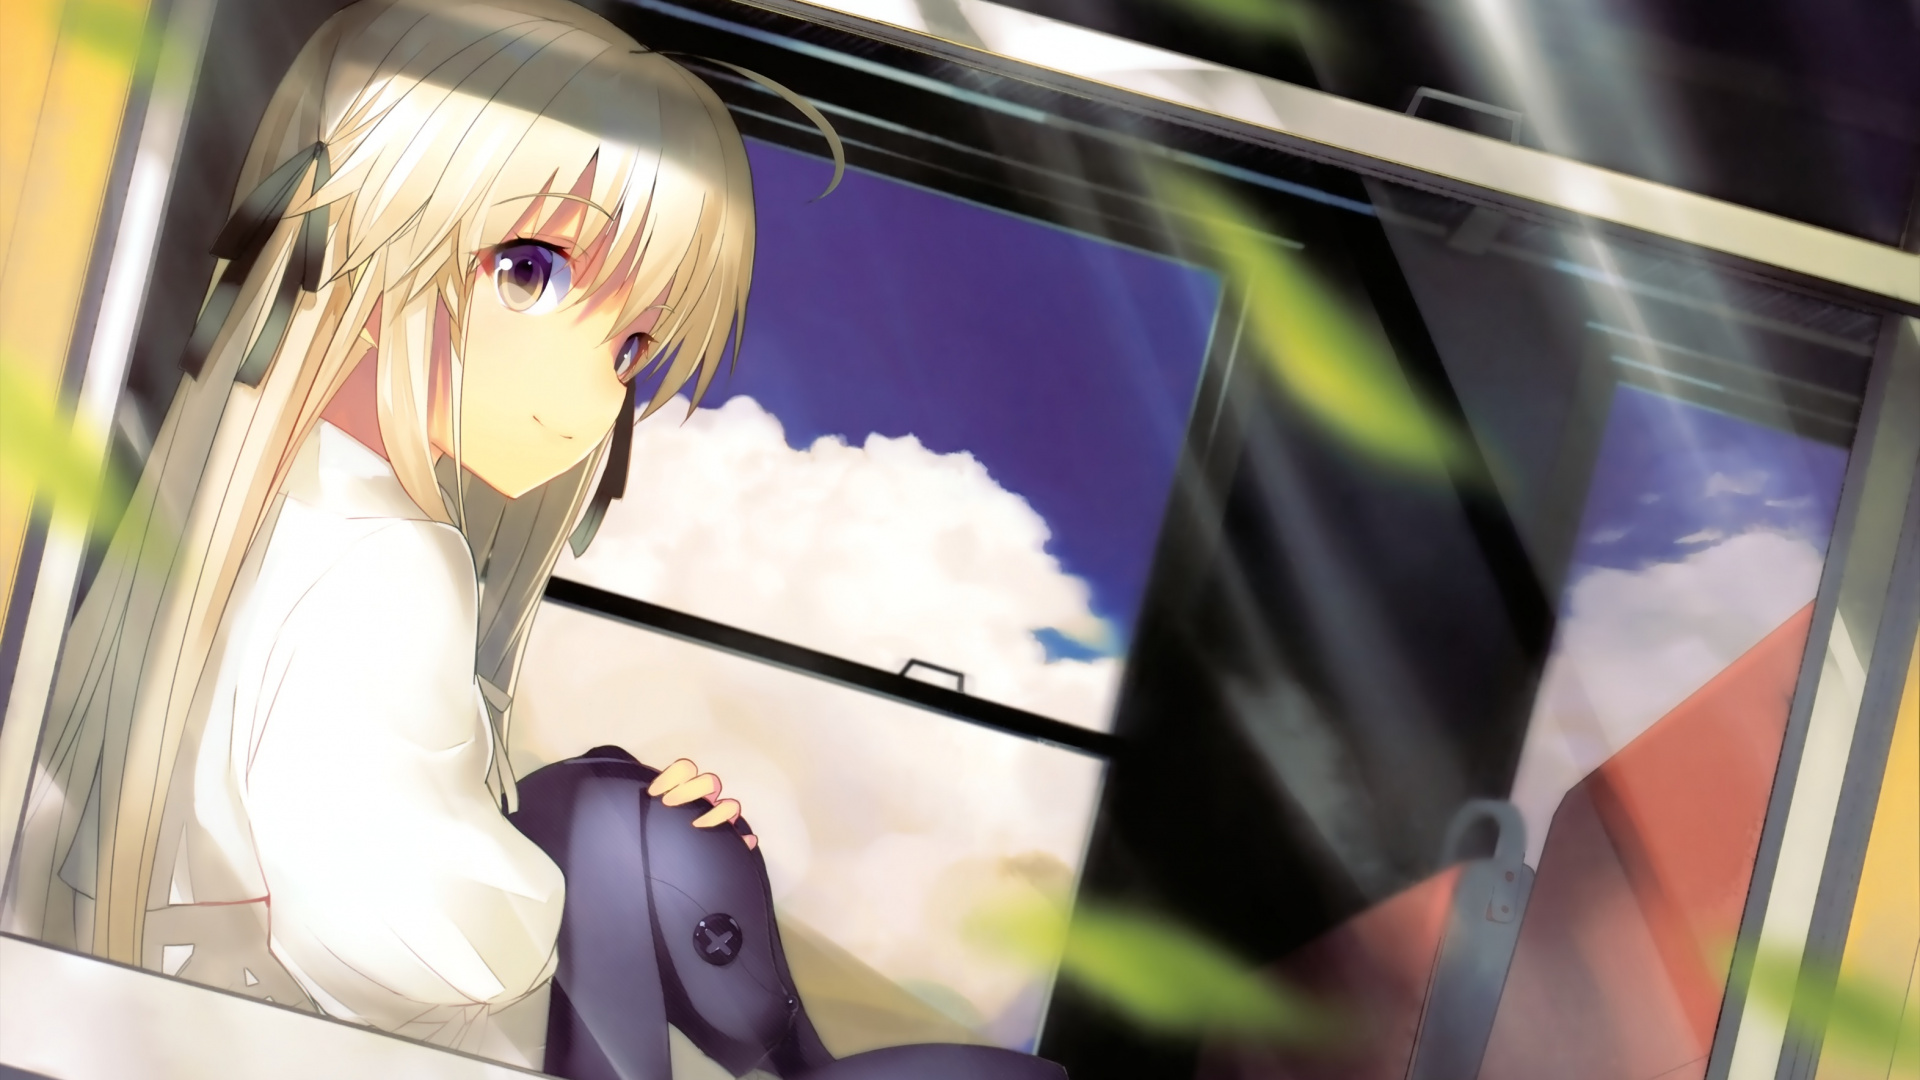 Blonde Haired Woman in White Long Sleeve Shirt Anime Character. Wallpaper in 1920x1080 Resolution